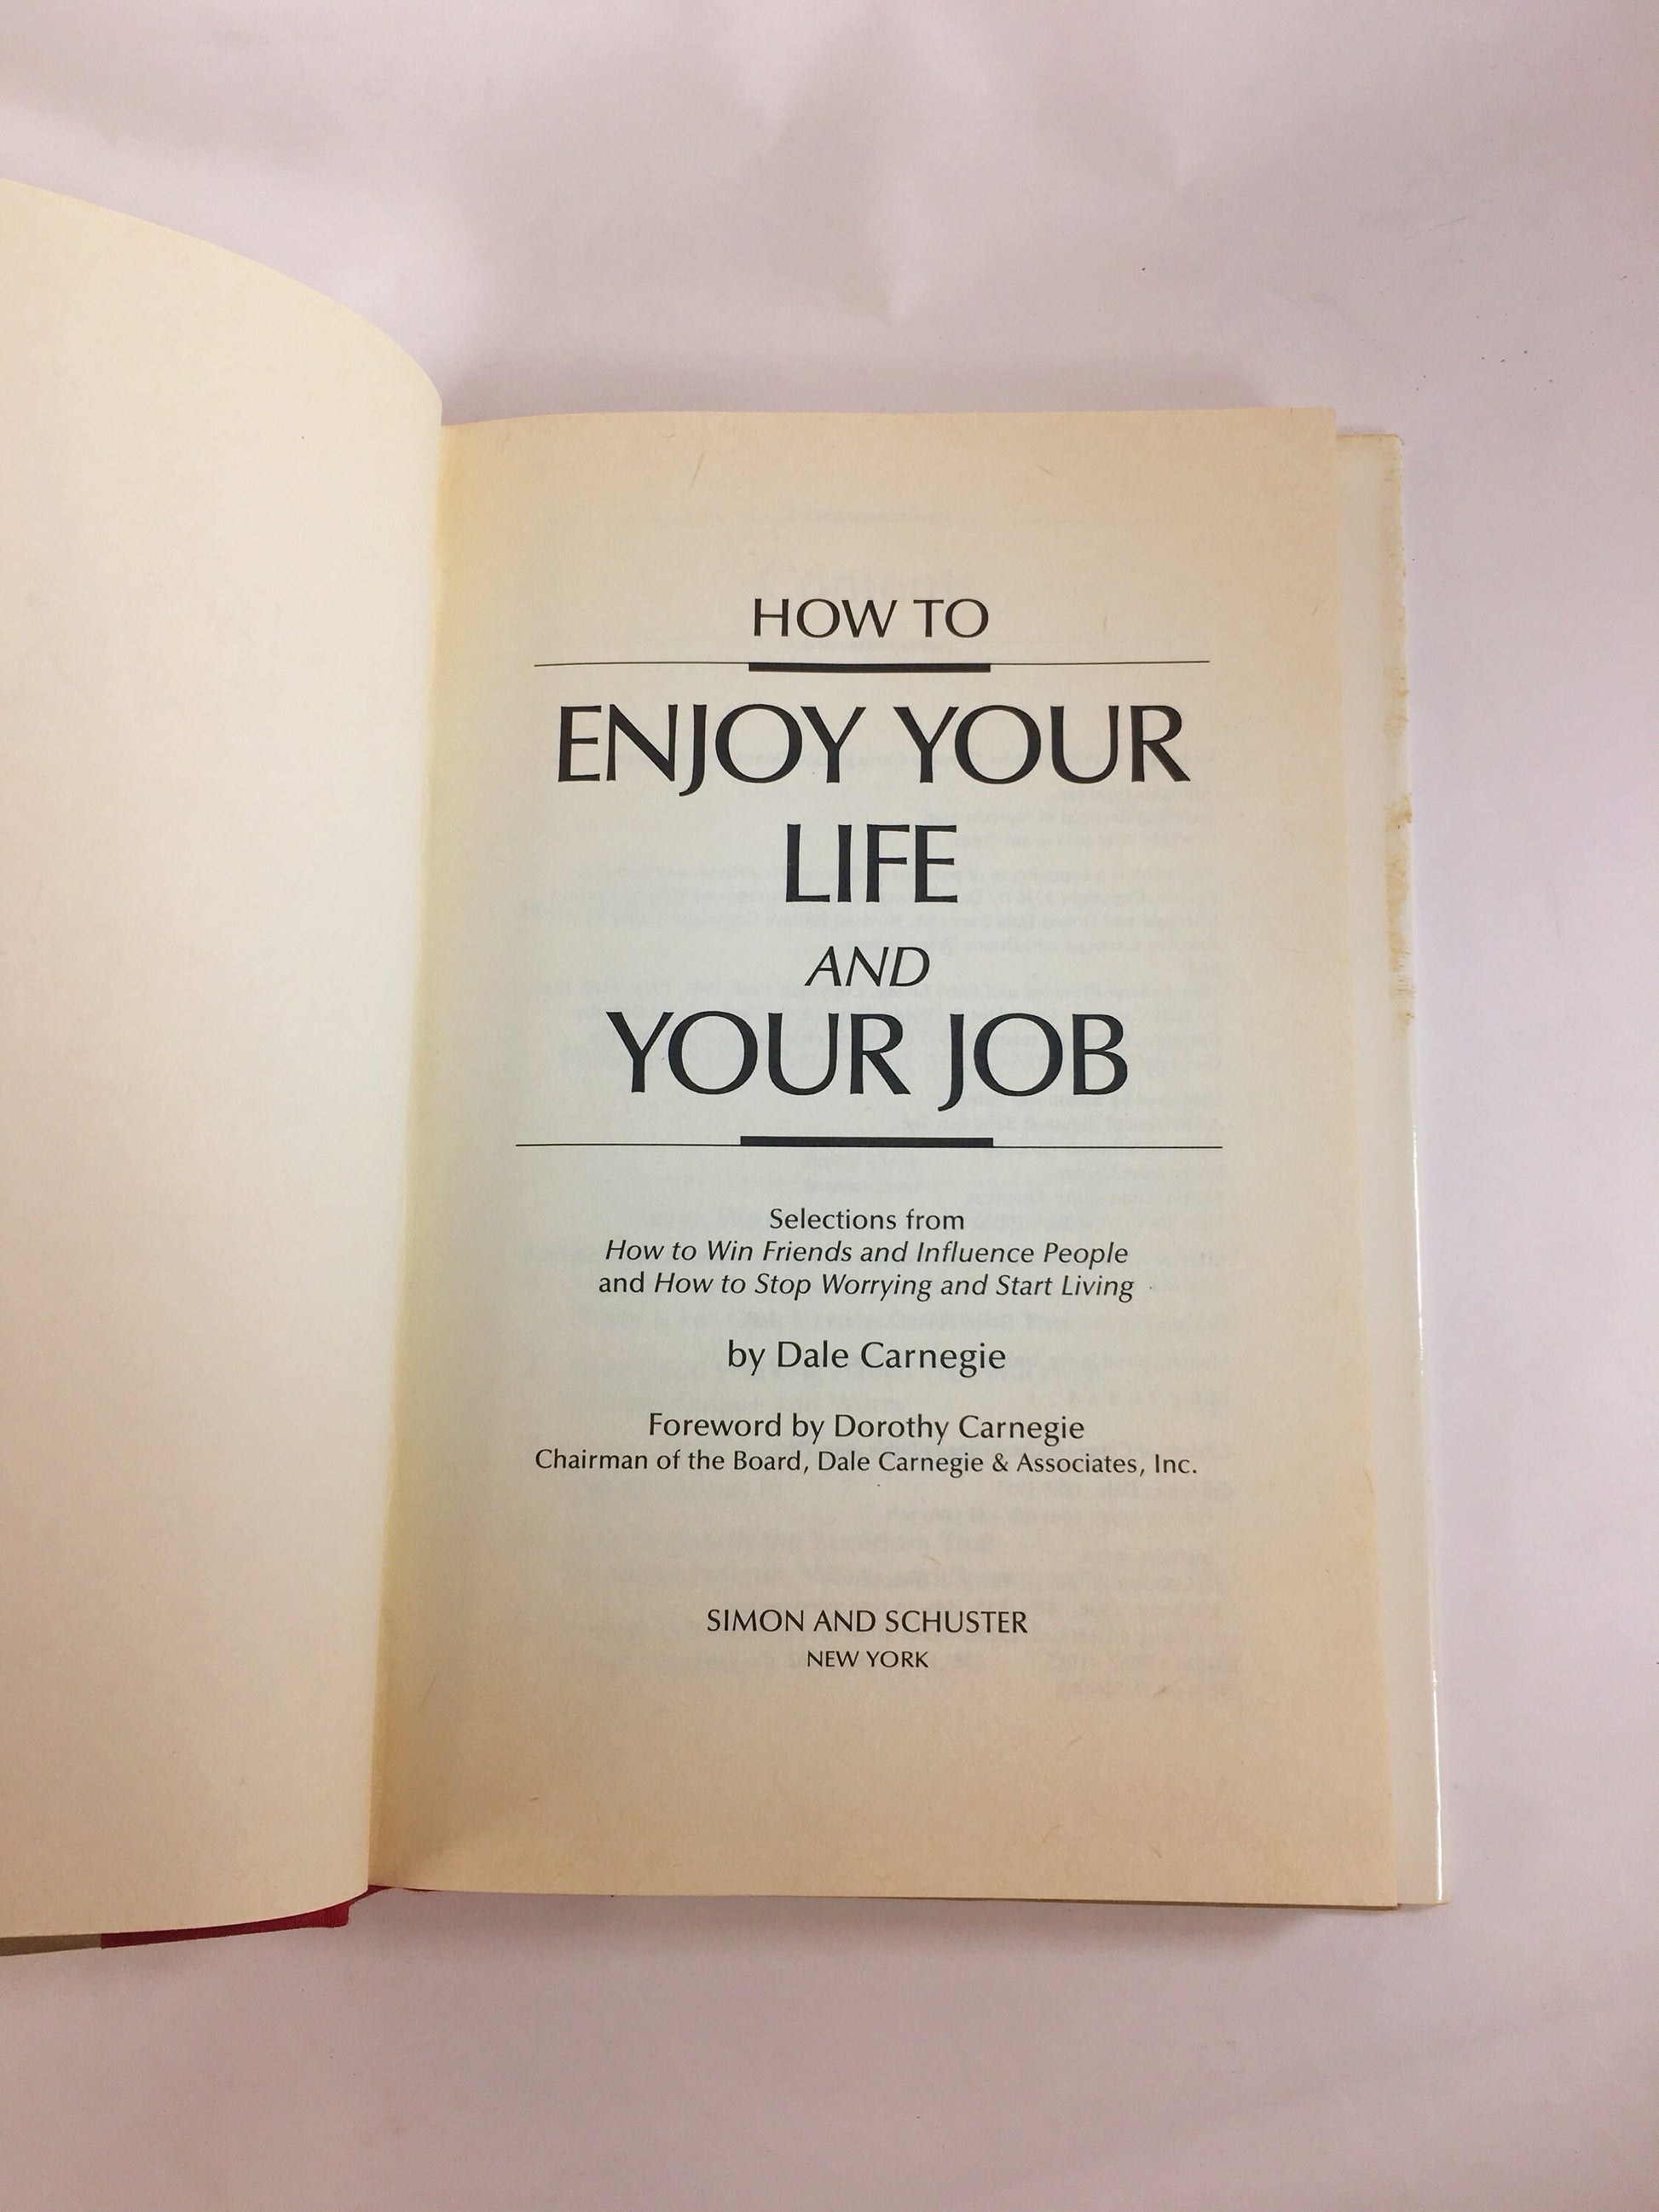 Dale Carnegie How to Enjoy your Life & your Job FIRST EDITION vintage book Yellow home office book decor. Mindfulness Improvement self care